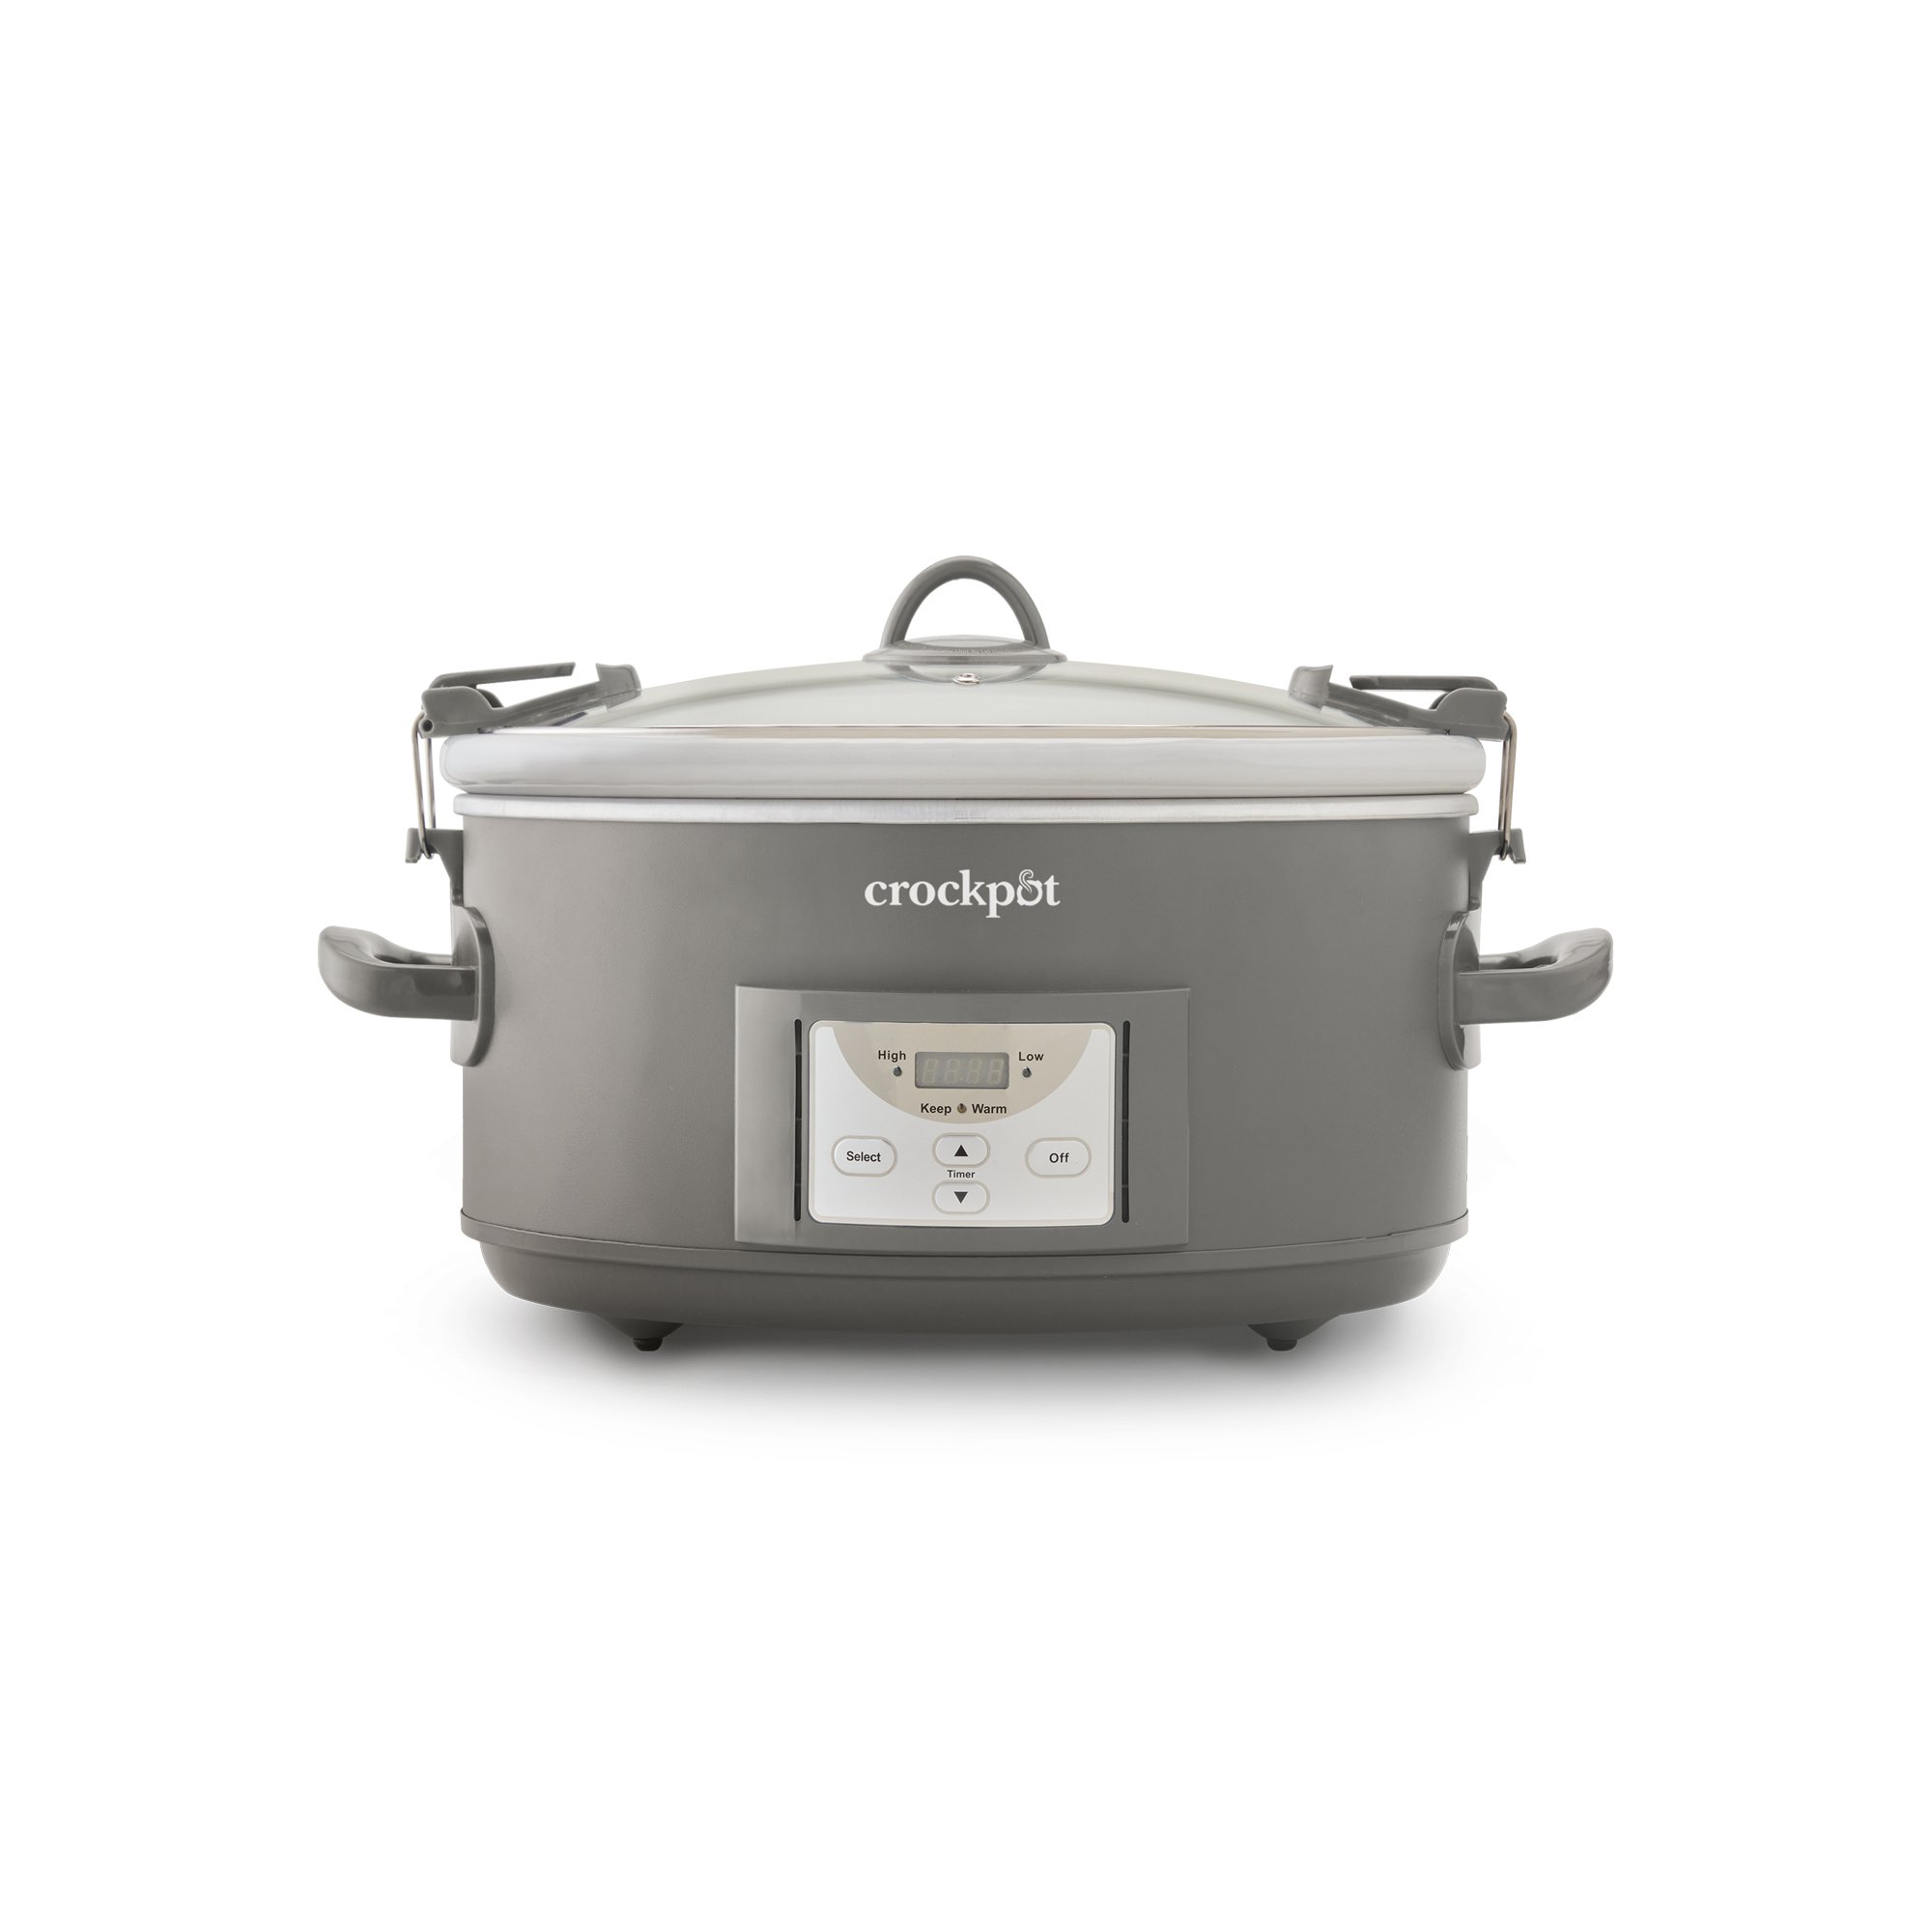 The Crockpot 7-Quart Manual Slow Cooker Is 25 Percent Off for Labor Day